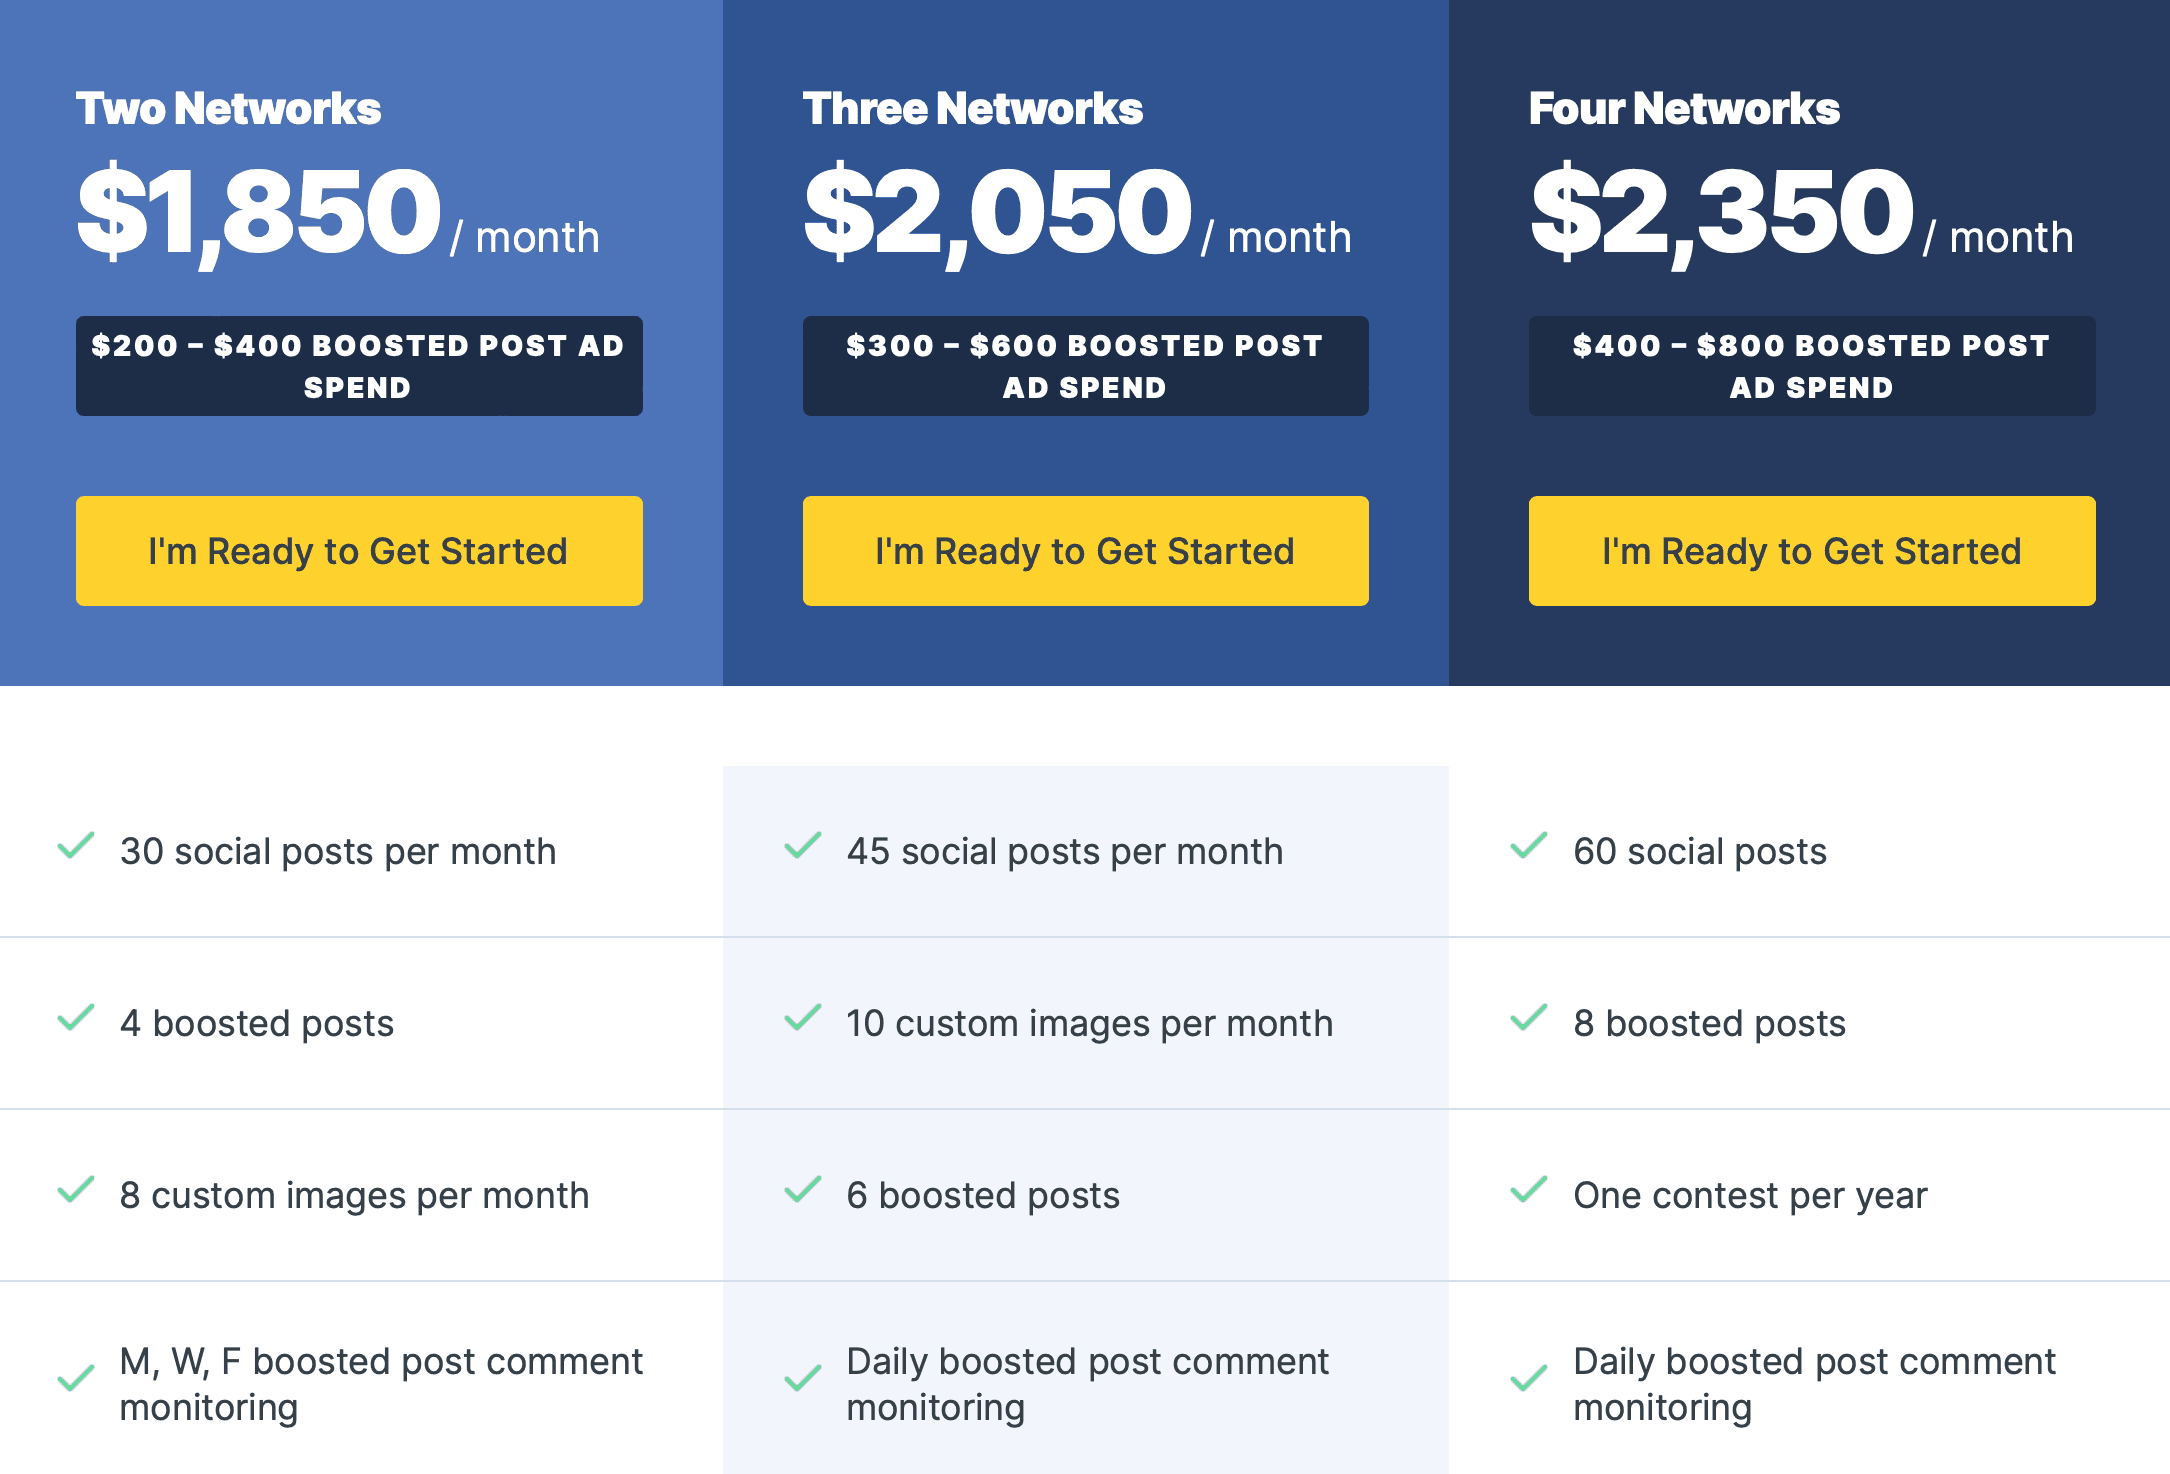 Pricing/Packages